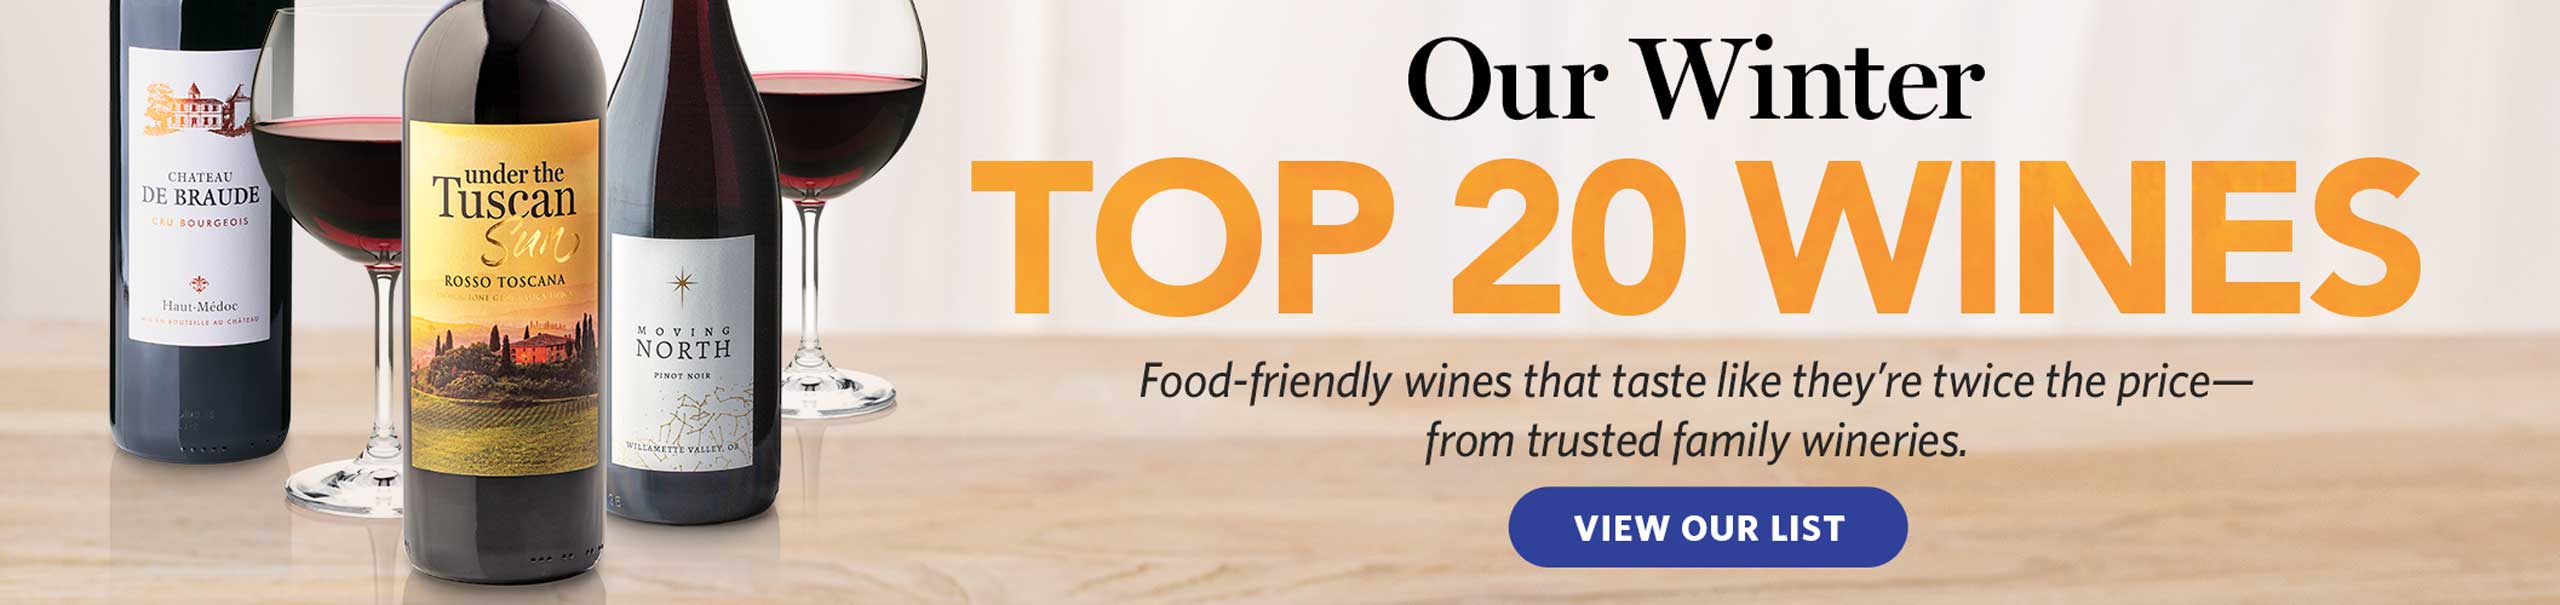 Our winter top 20 wines - view our list